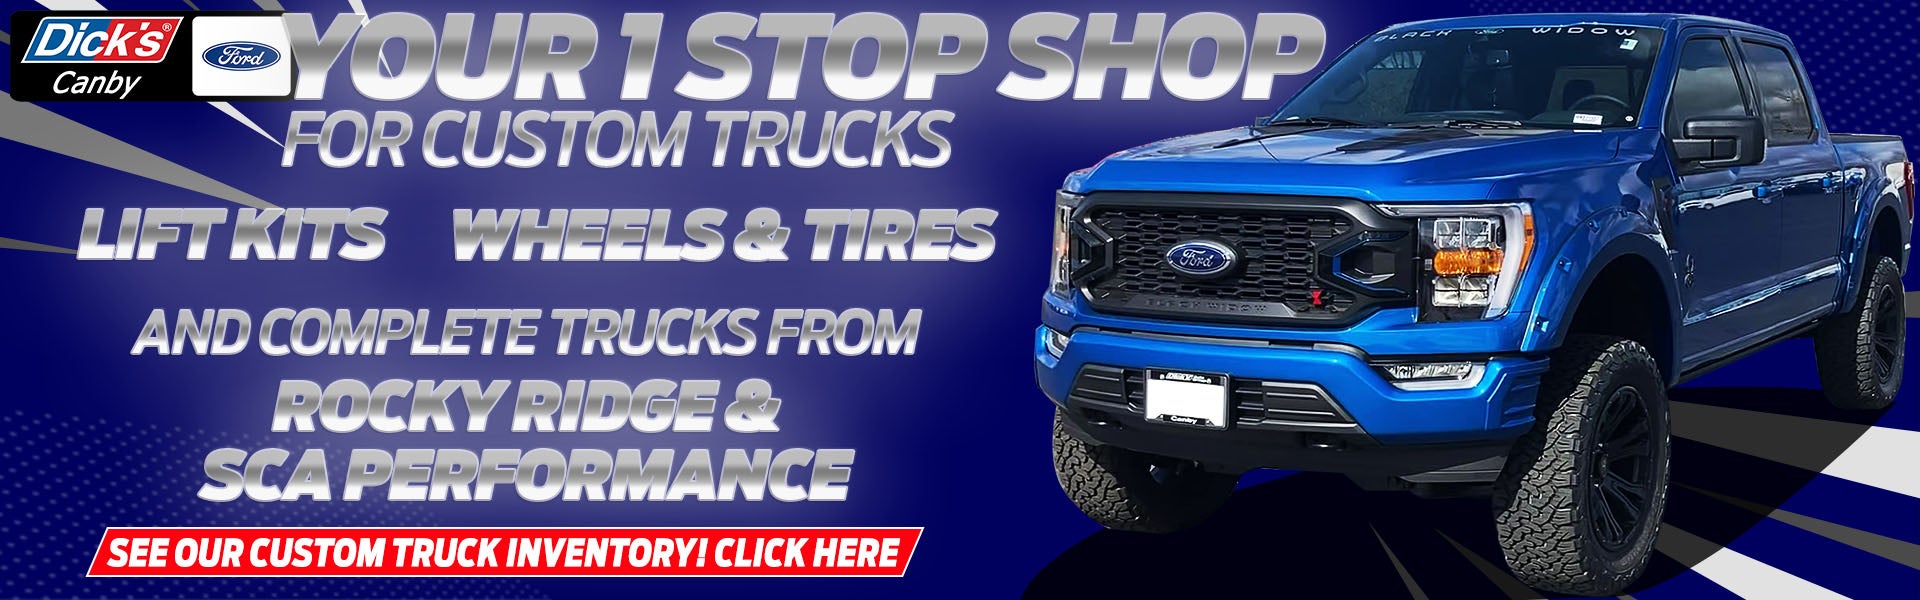 Custom Trucks at Dick's Canby Ford